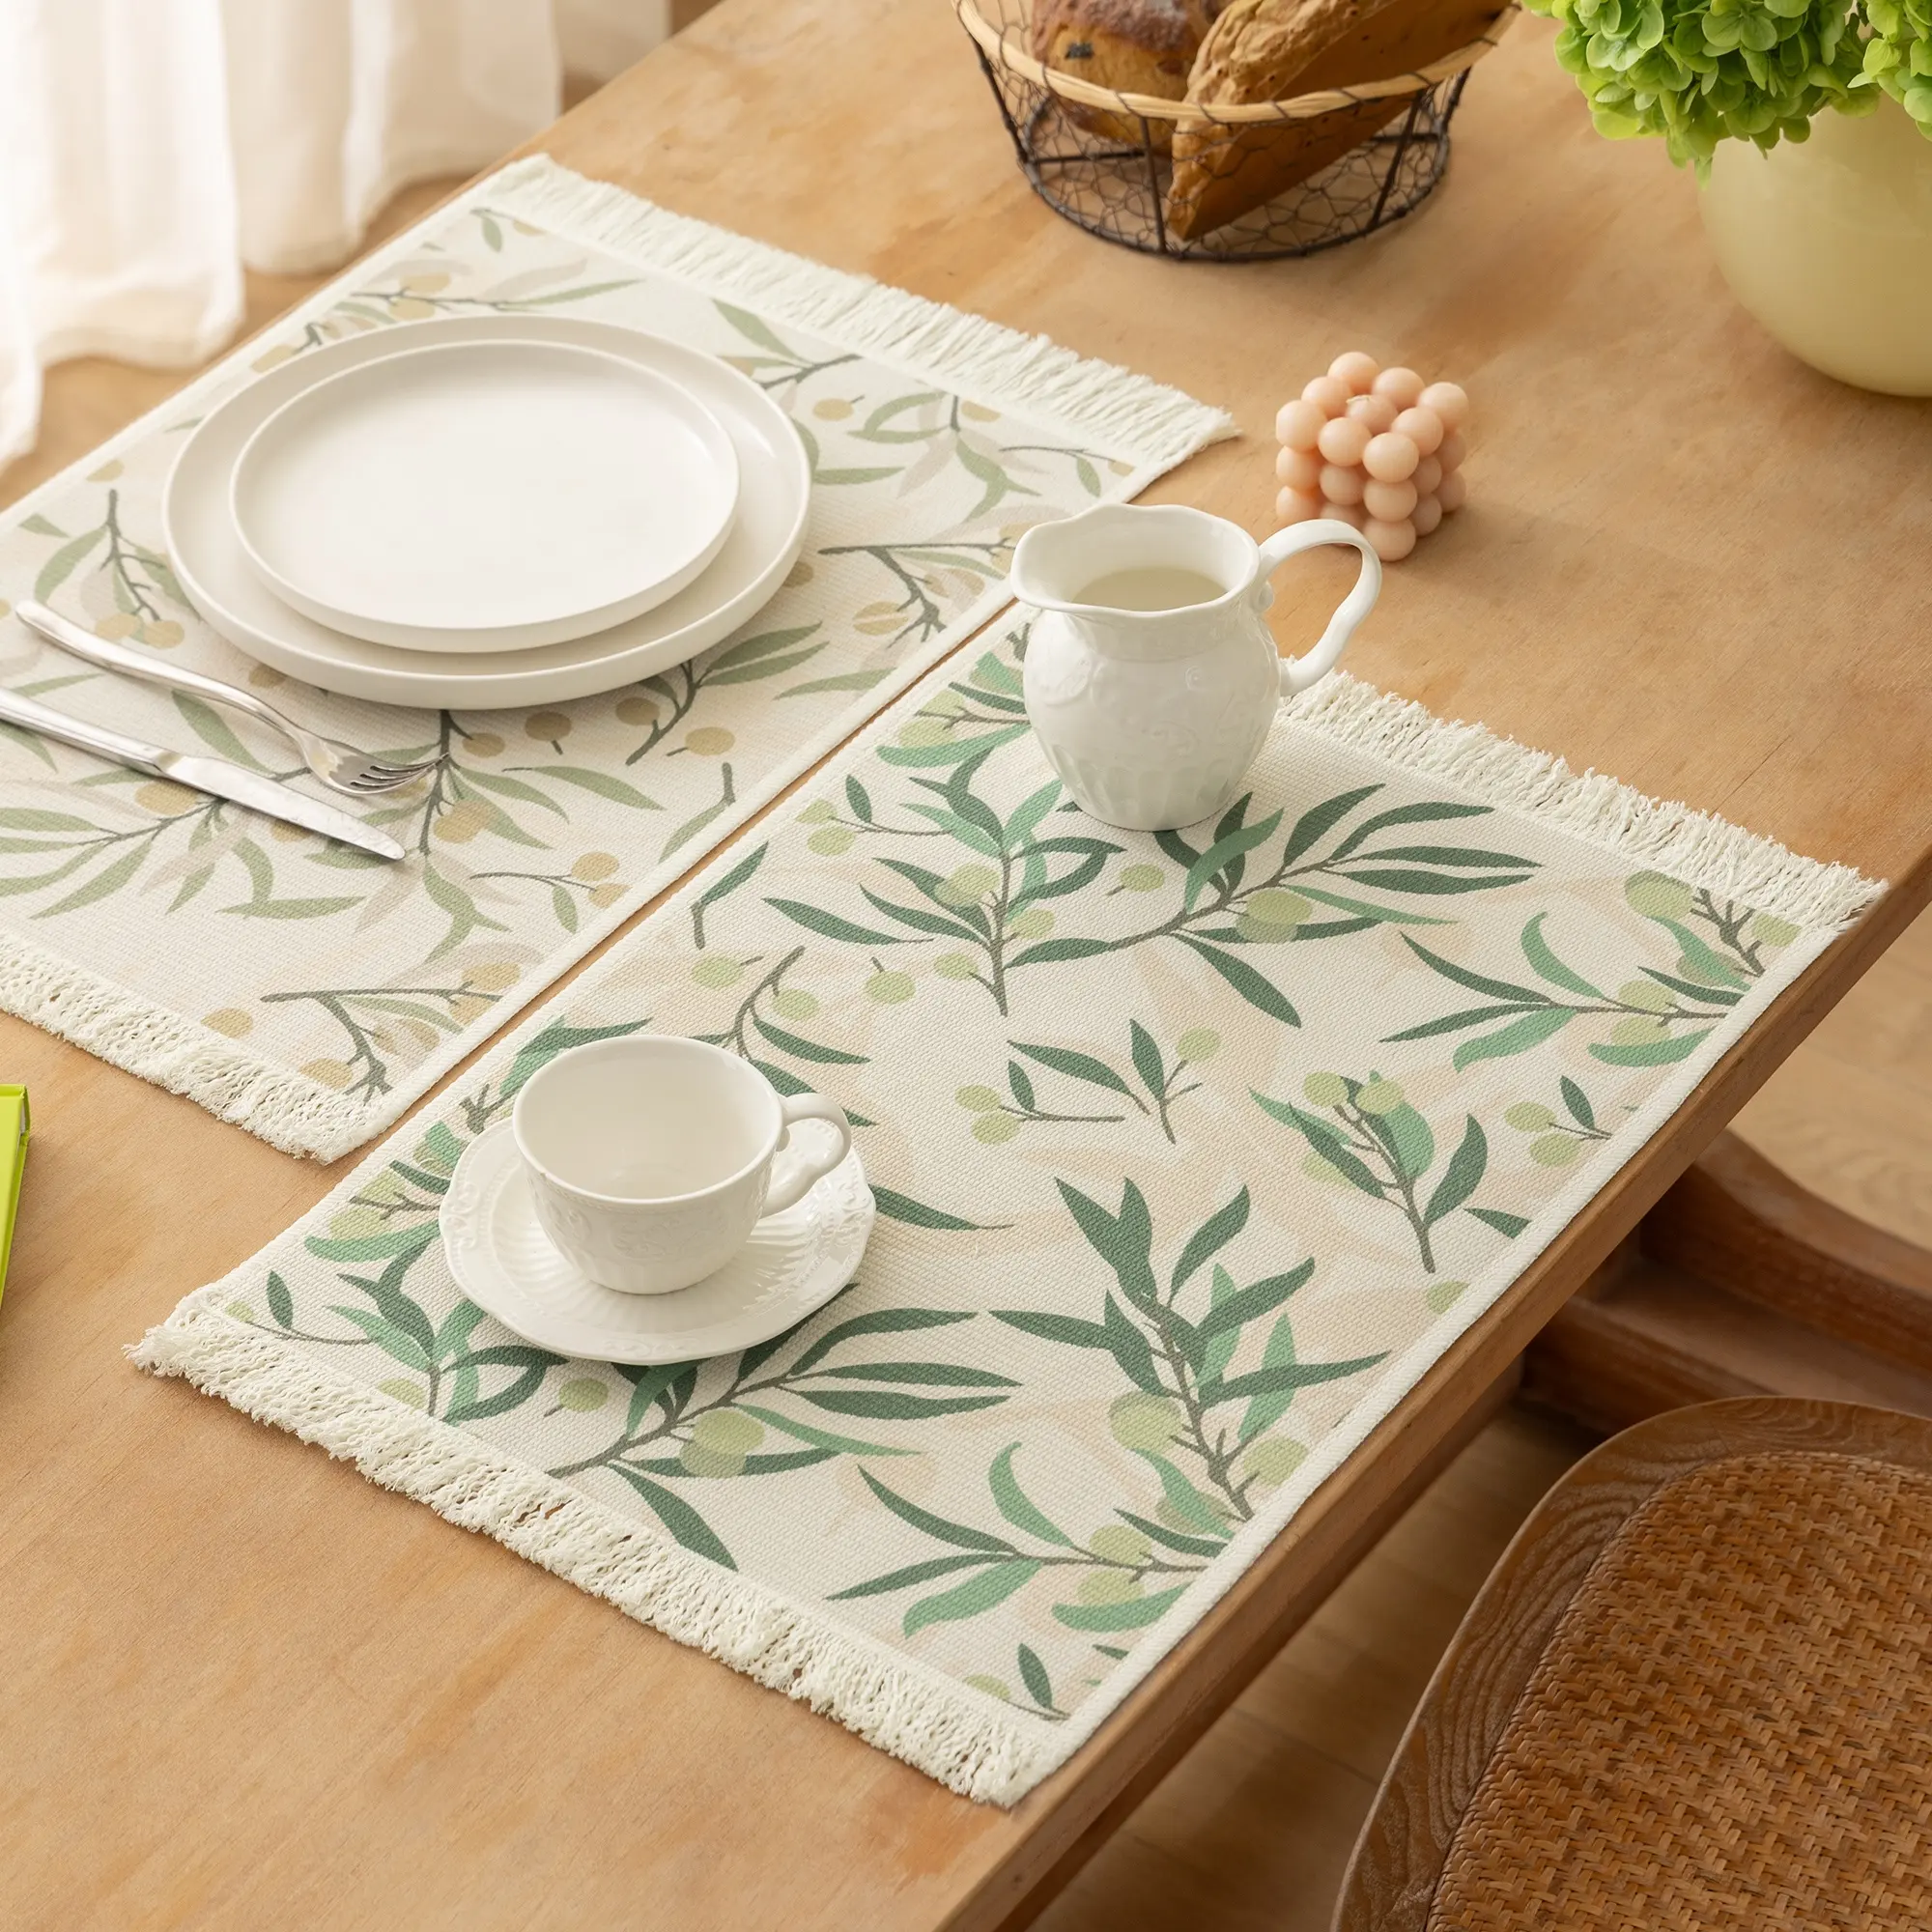 2024 Original Design Natural Placemats Plant Flower Printed Placemats For Dining Table Woven Cotton Printed Table Mats